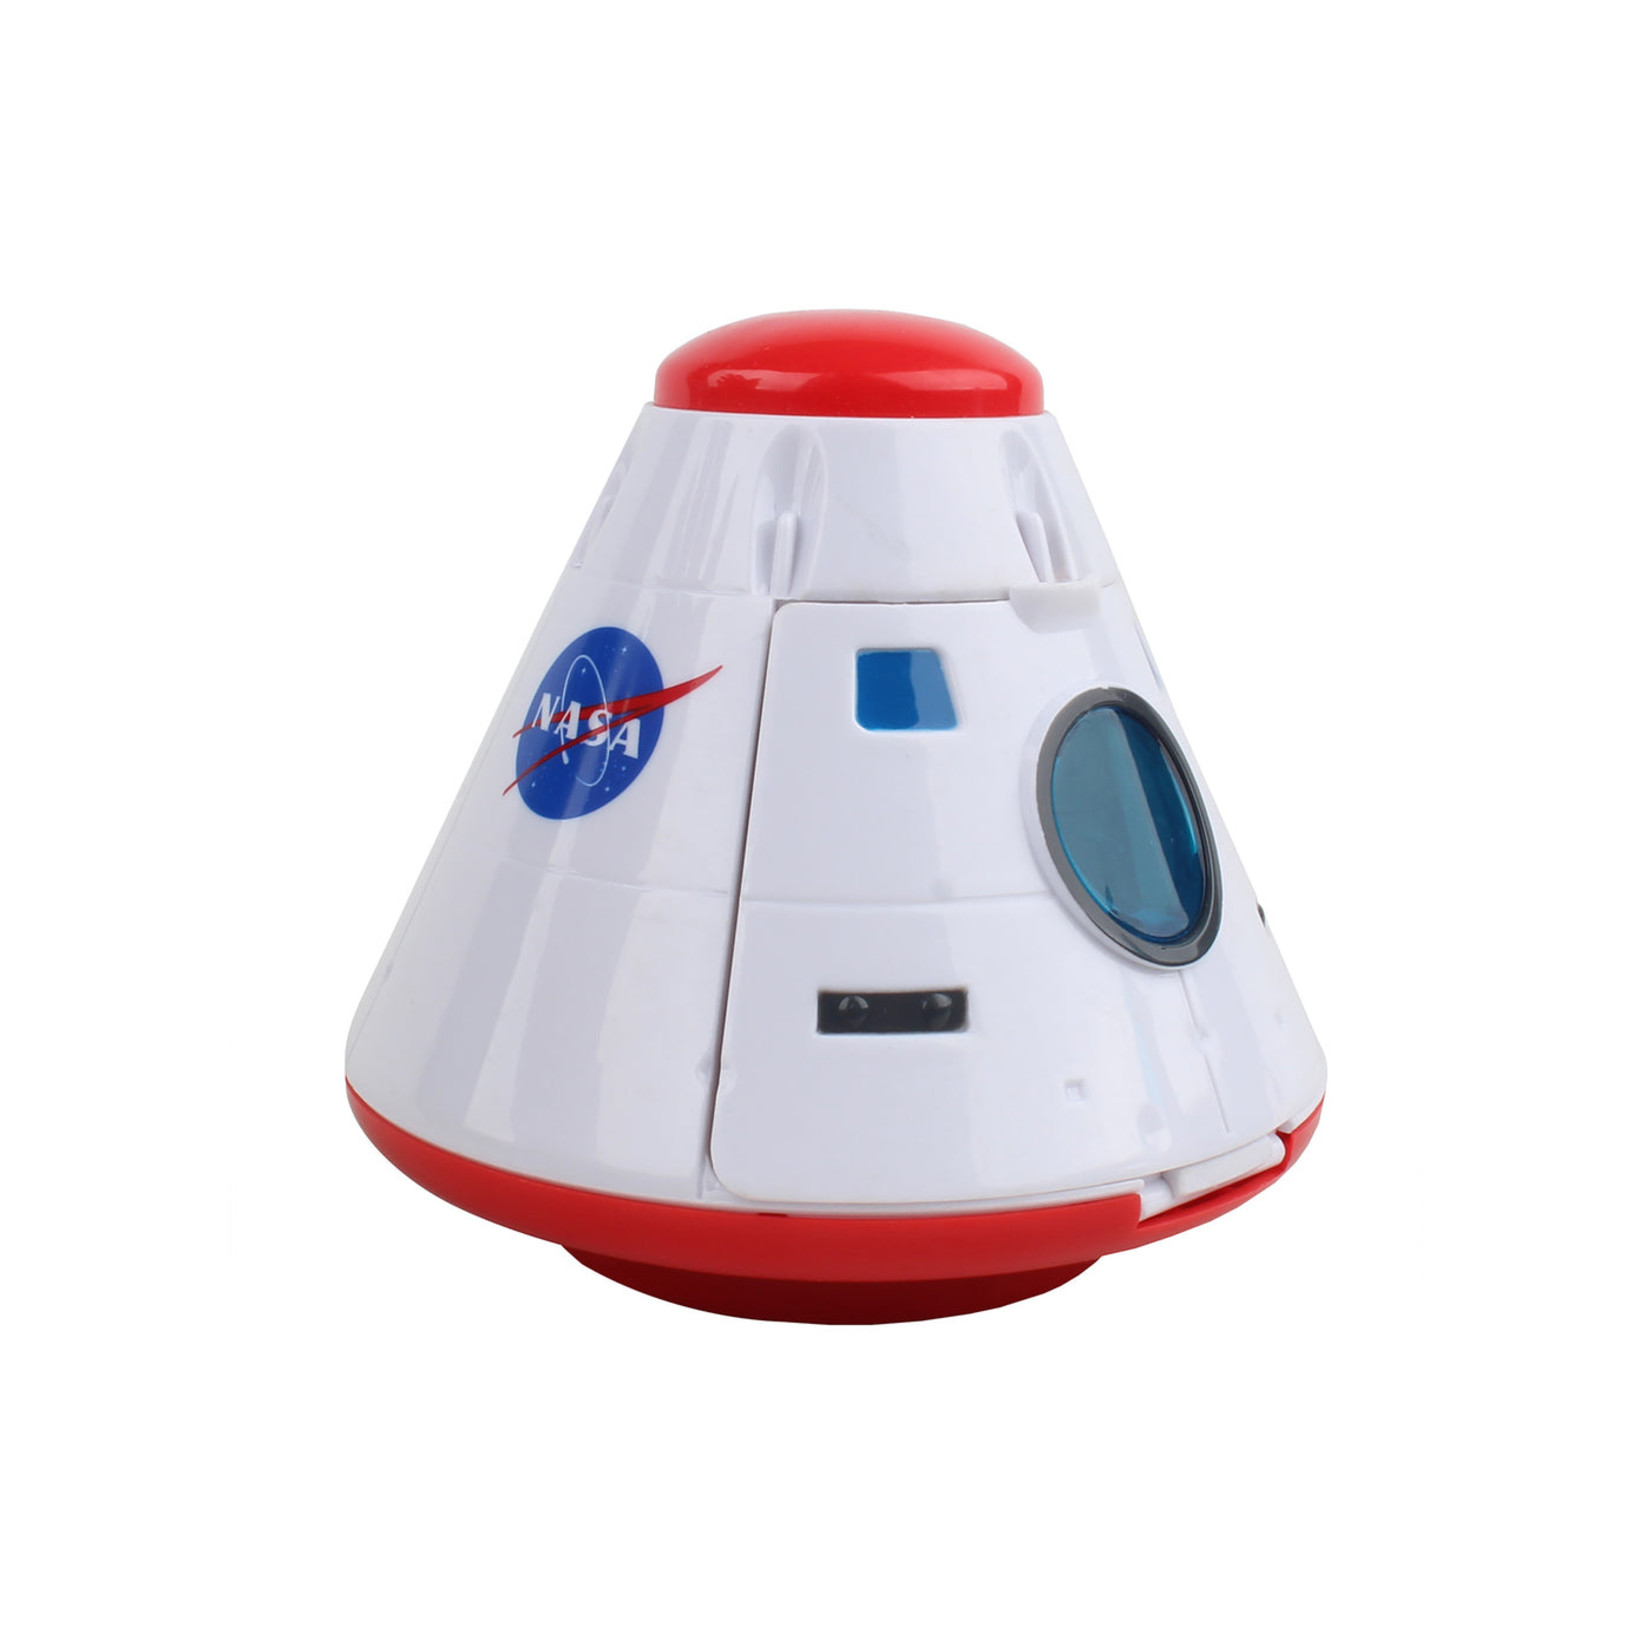 Space Adventure Space Shuttle by Daron Toys